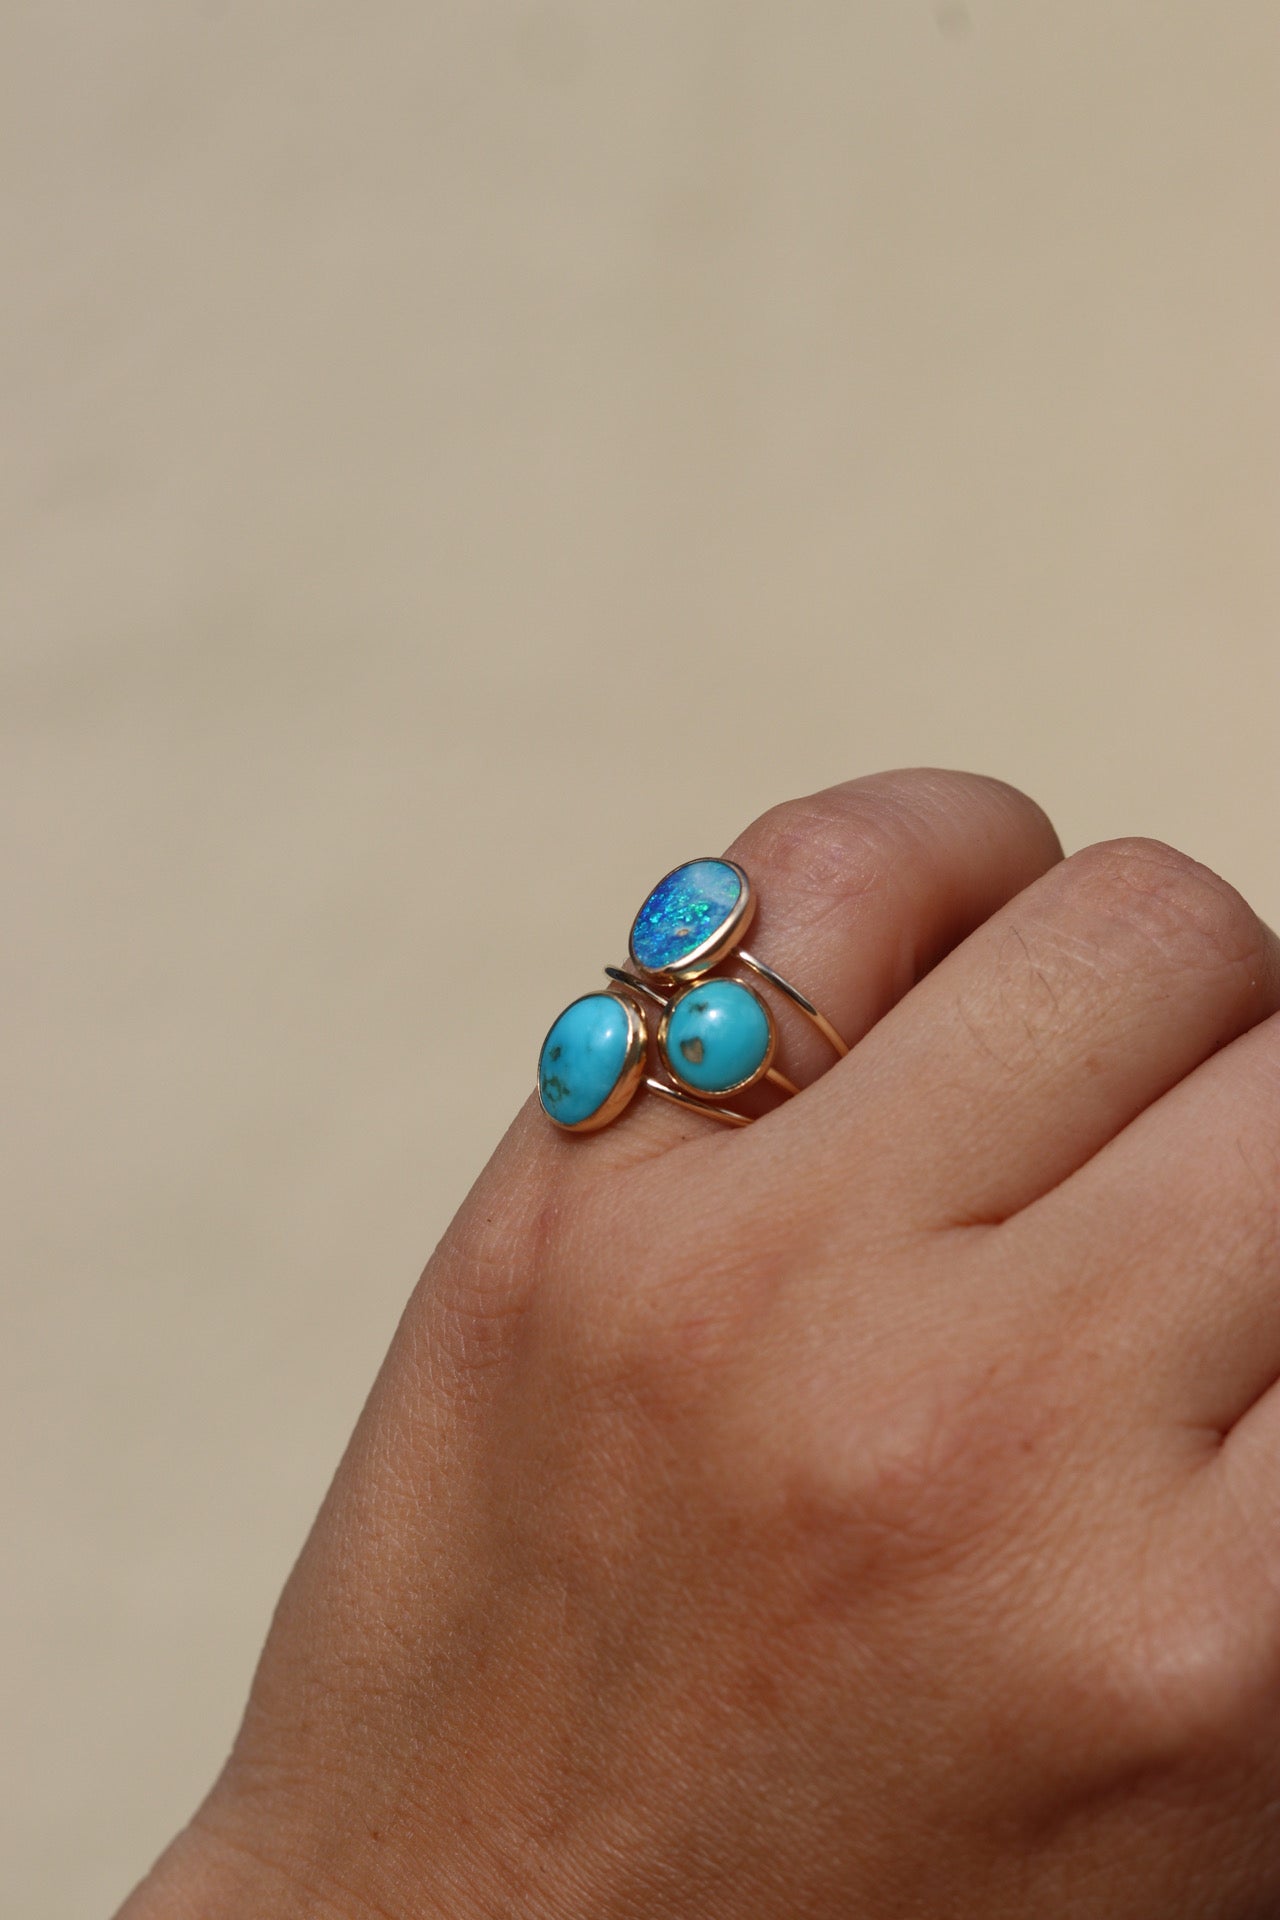 Turquoise in Gold ring - Size 7.15